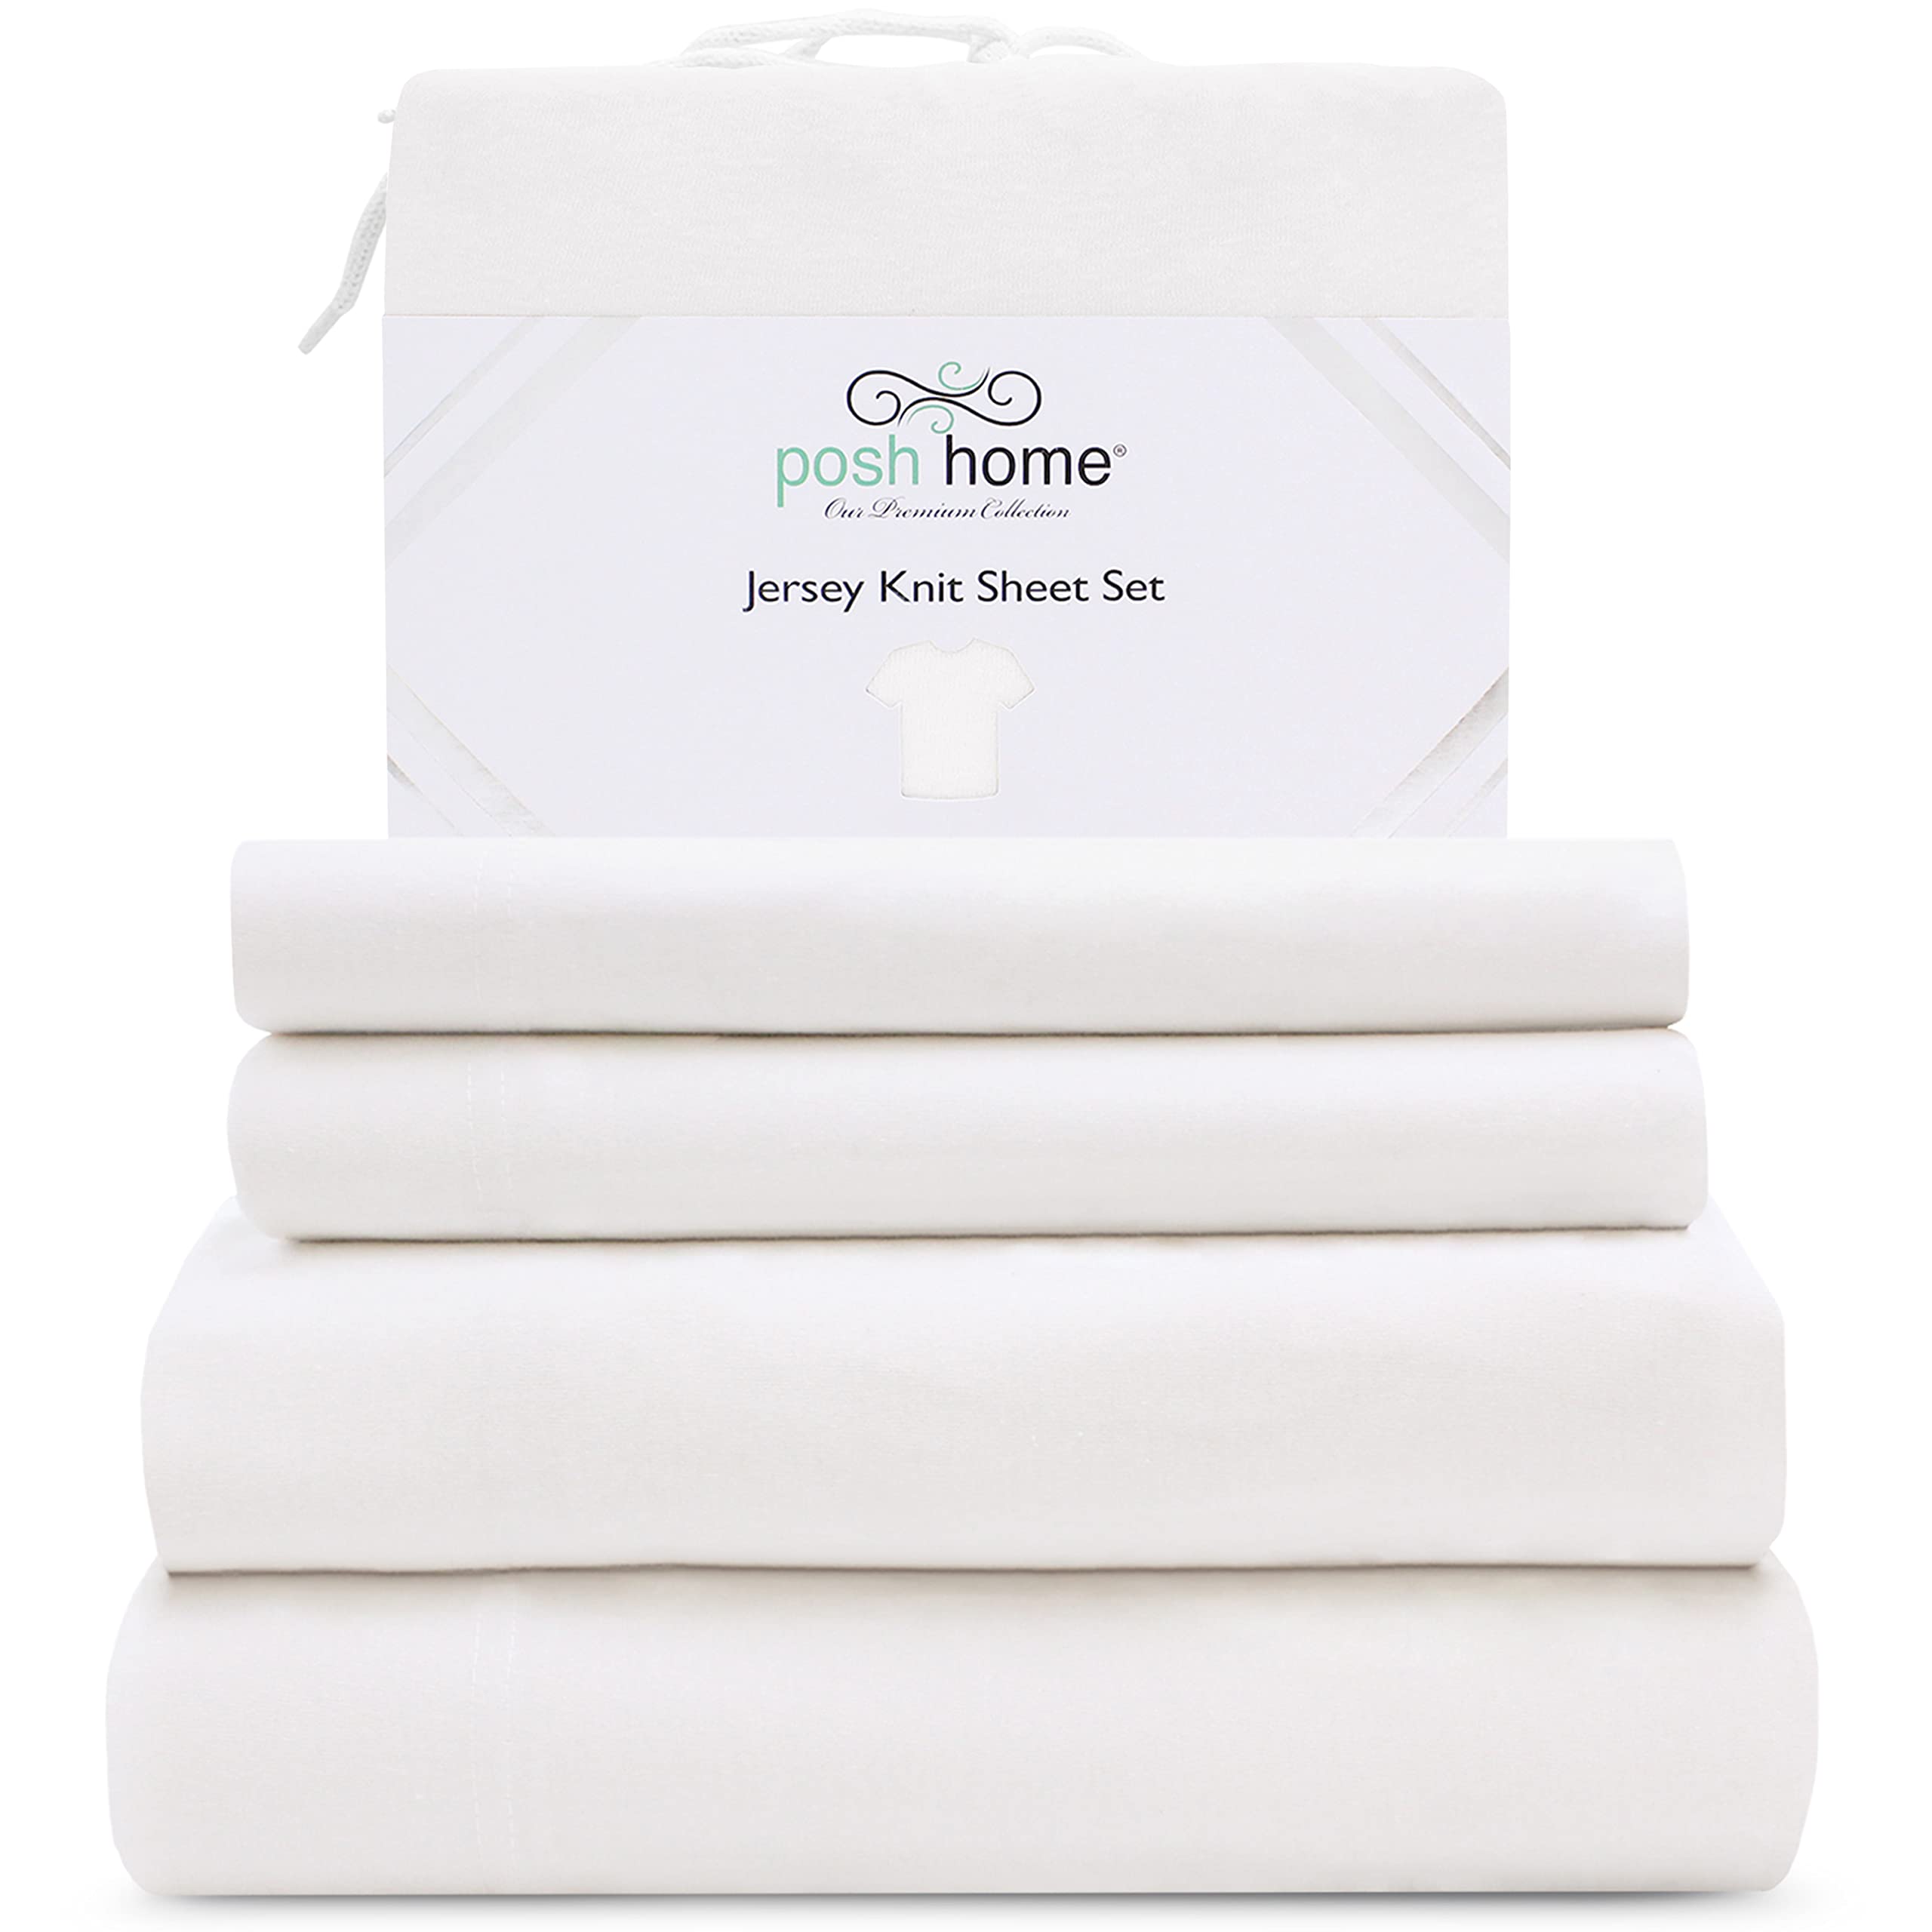 Posh Home Jersey Knit Sheet Set - 3-Piece Jersey Bed Sheets - T-Shirt Breathable Soft Cotton Jersey Sheets - Includes Flat Sheet